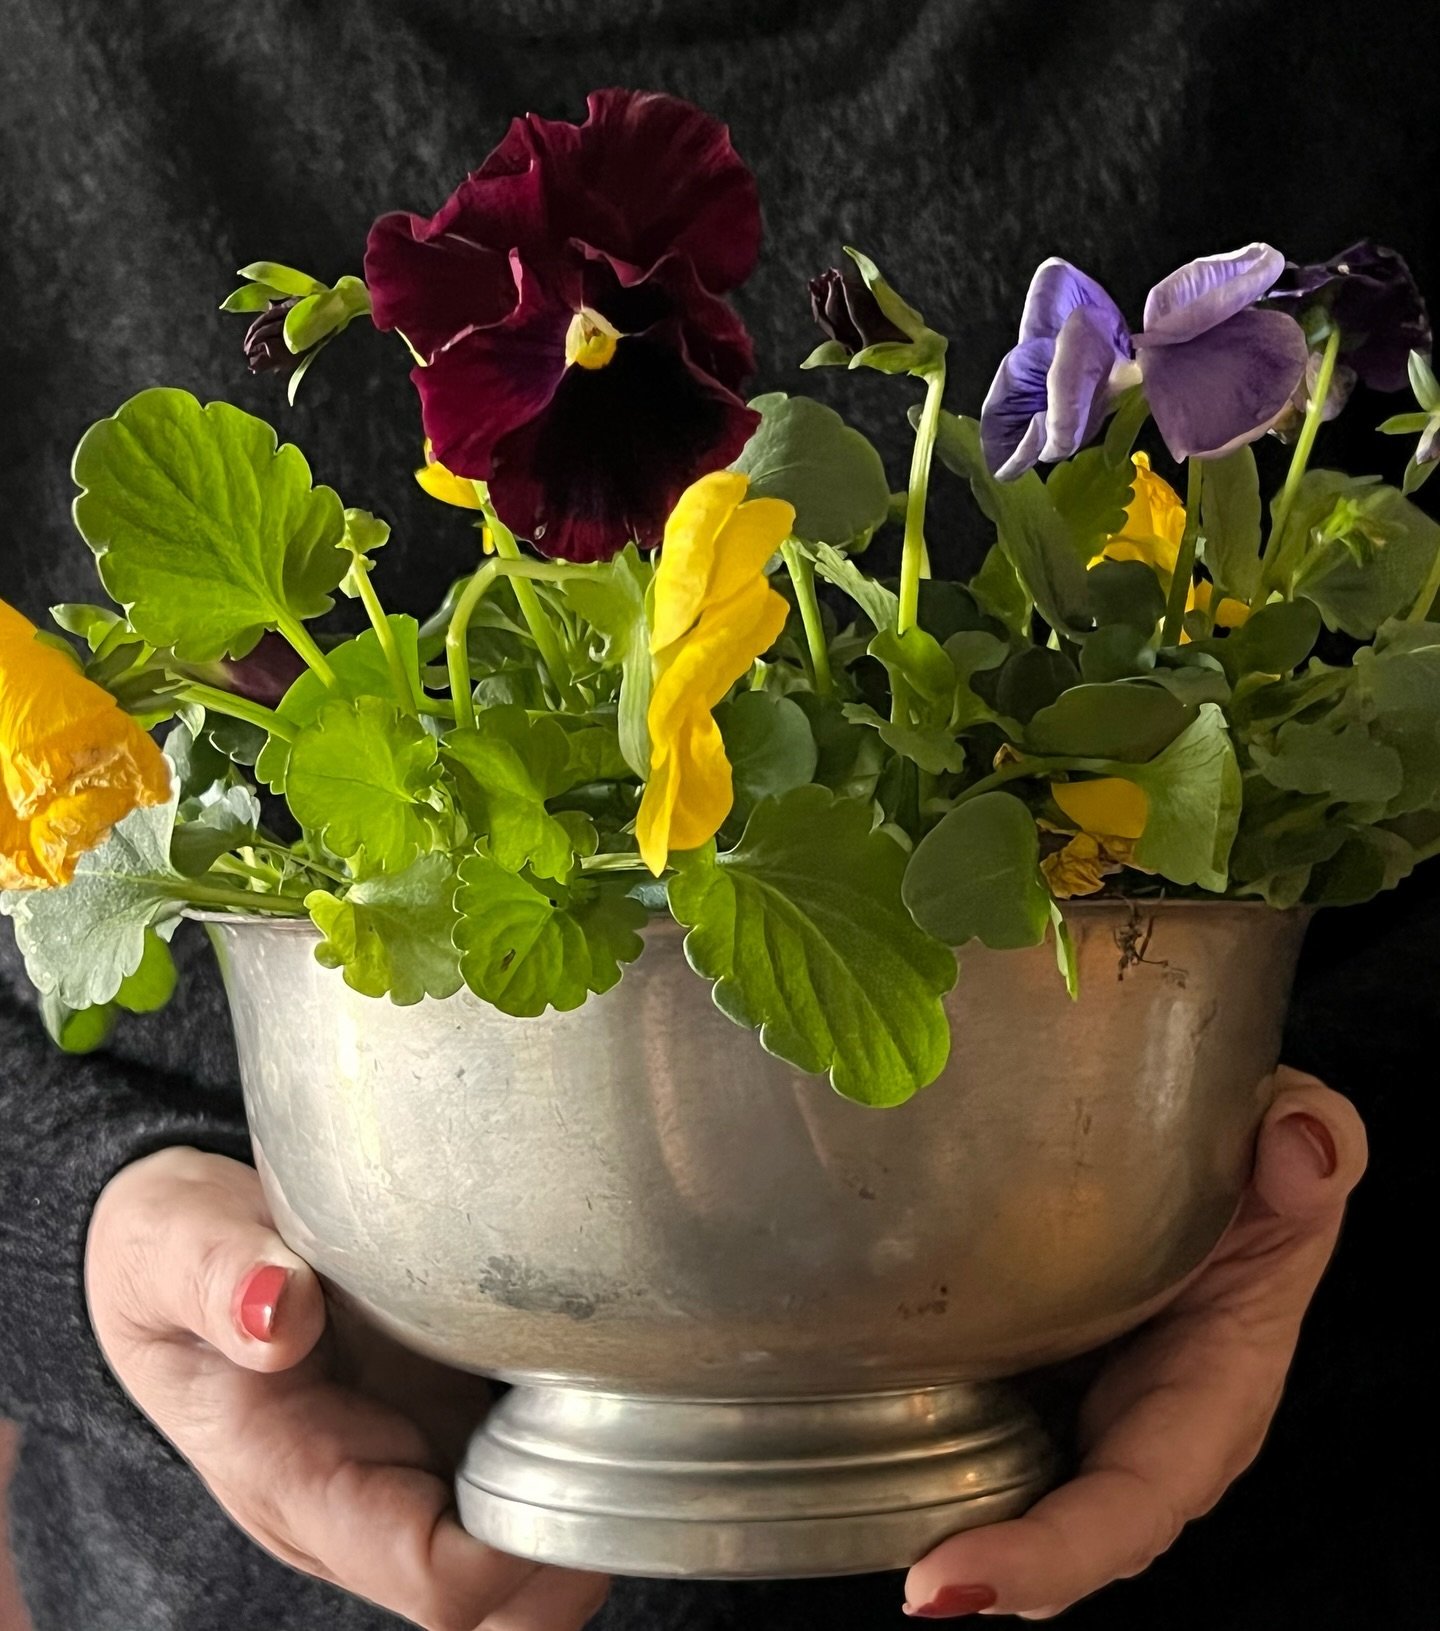 Pansies have arrived . . . springtime at HHM. Happy Sunday!
#pansies #springtime #planting #prettyflowers #pewter #historichomesmagazine #itsallinthedetails #springinnewengland